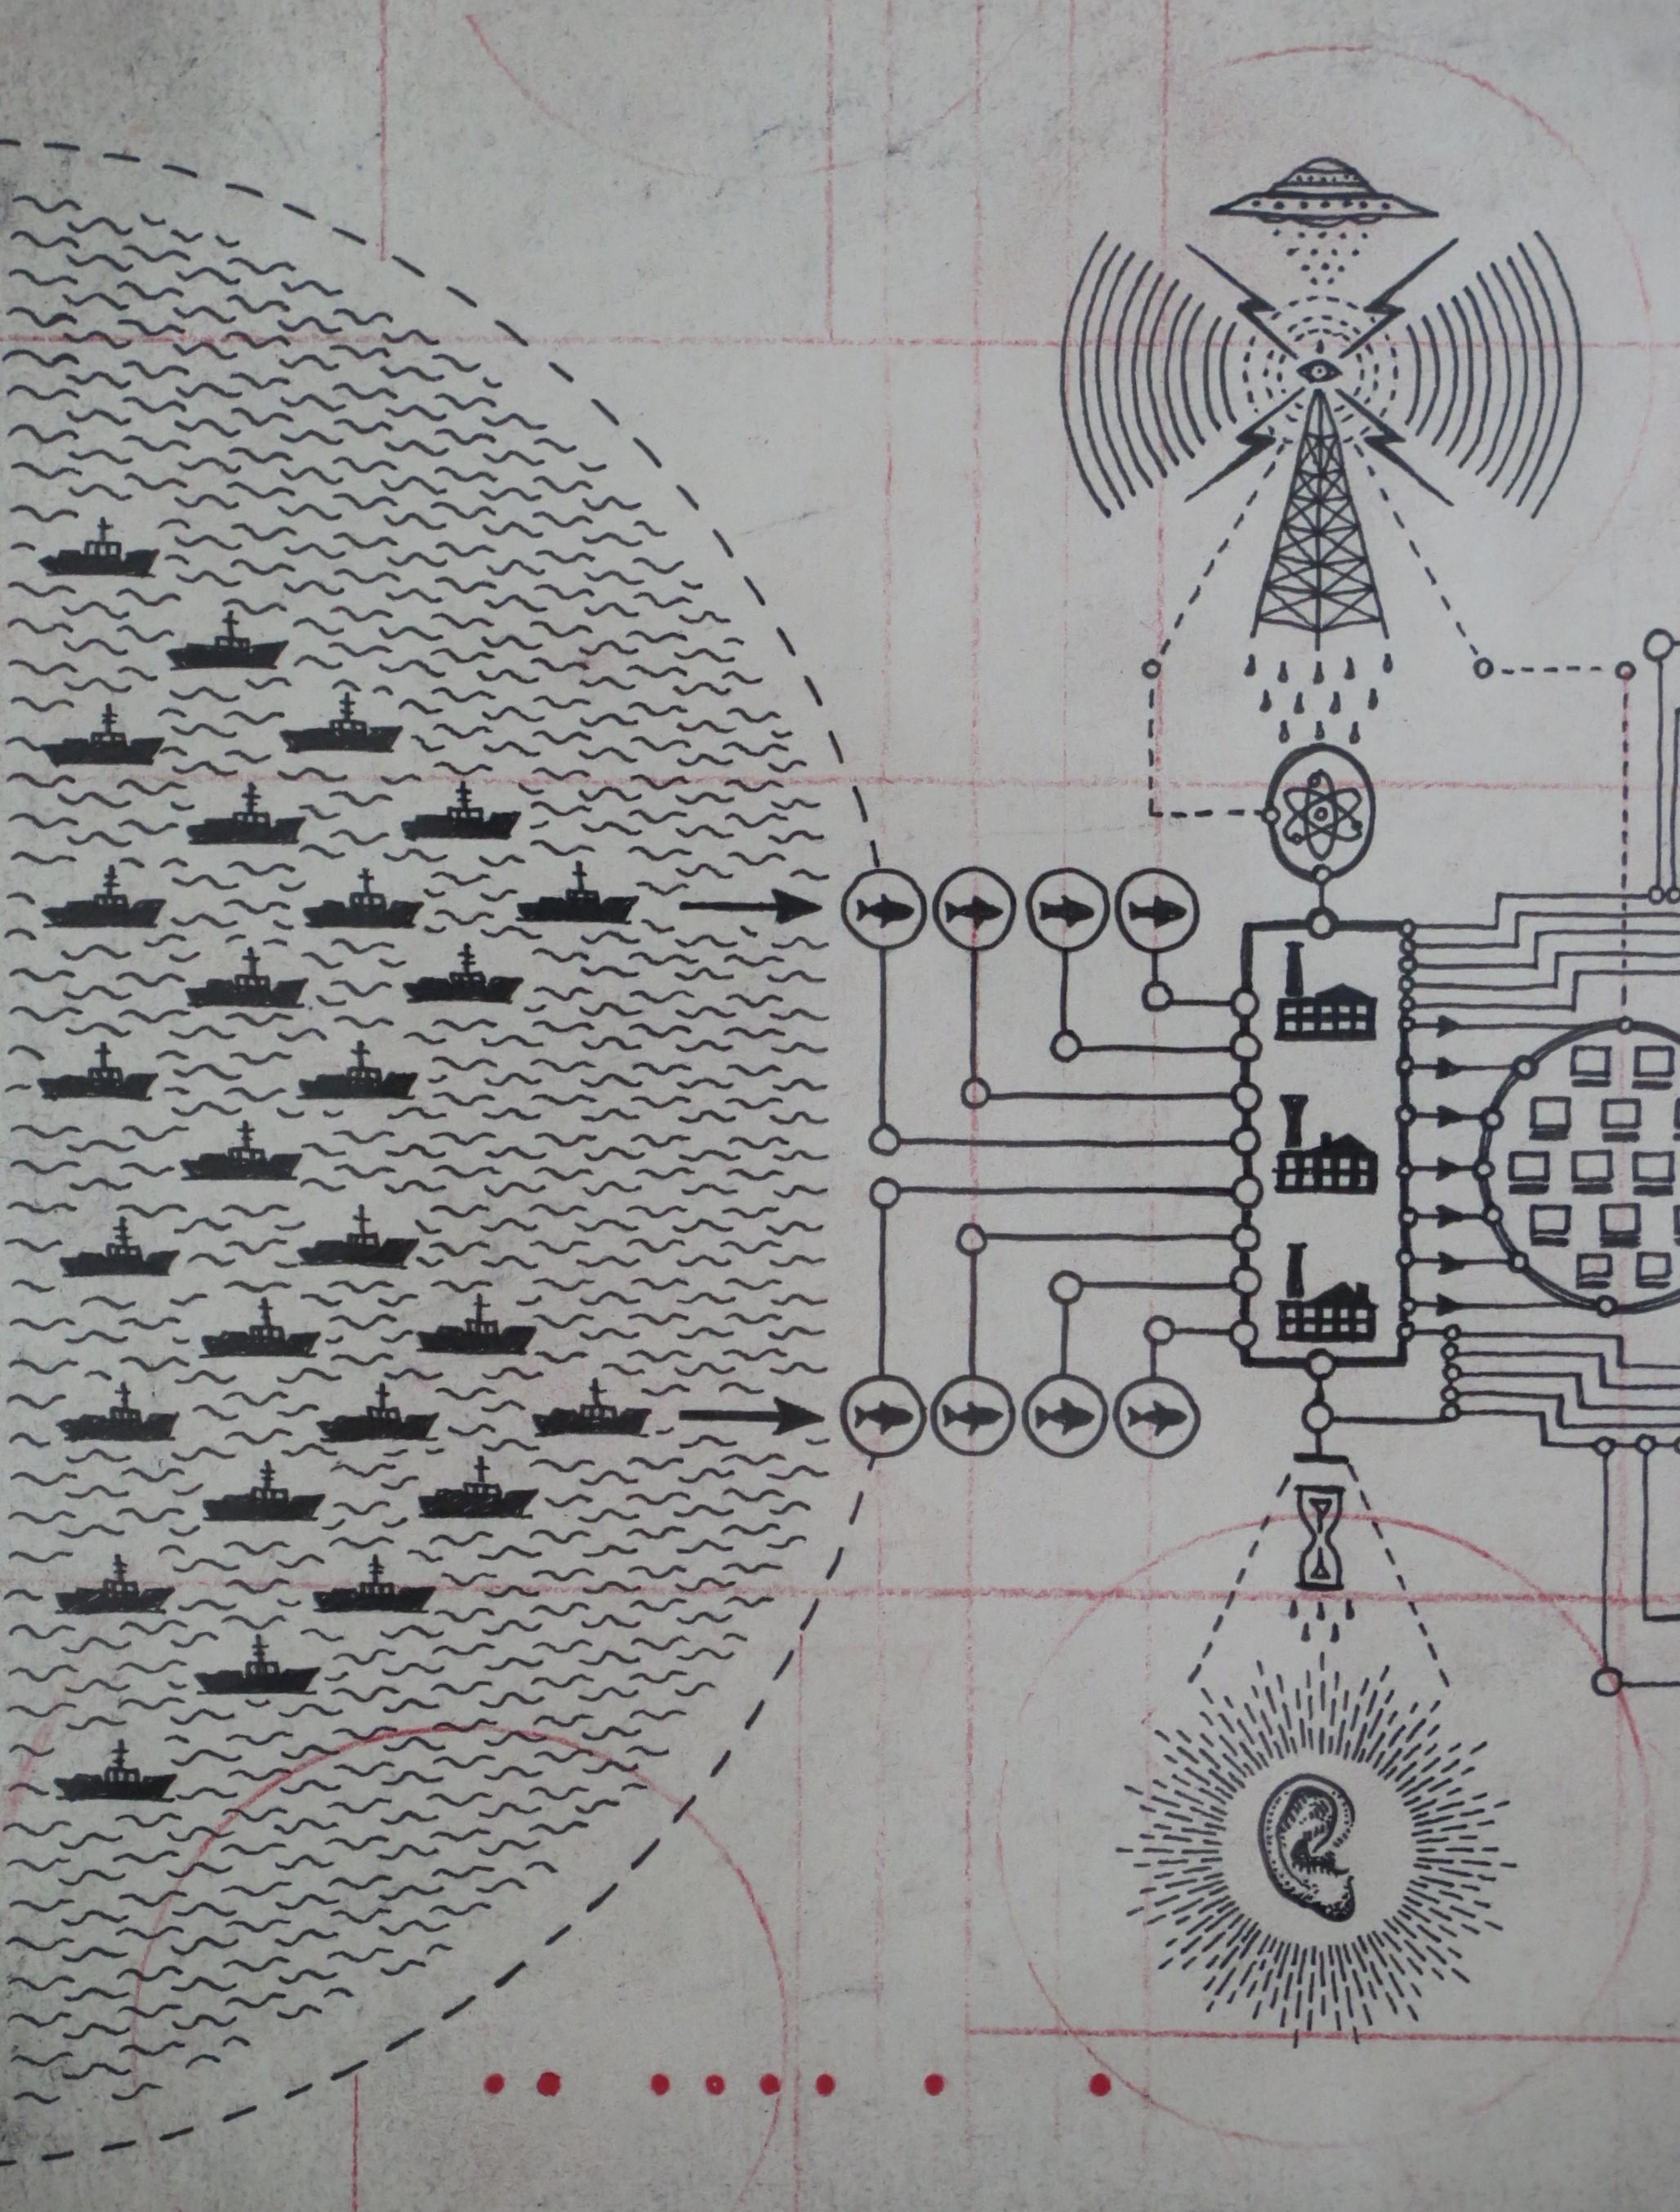 Mysterious drawing making connections in the cyber world in inexplicable ways in this drawing by Daniel Martin Diaz. Graphite and crimson pencil on paper. The drawing floats in a frame.